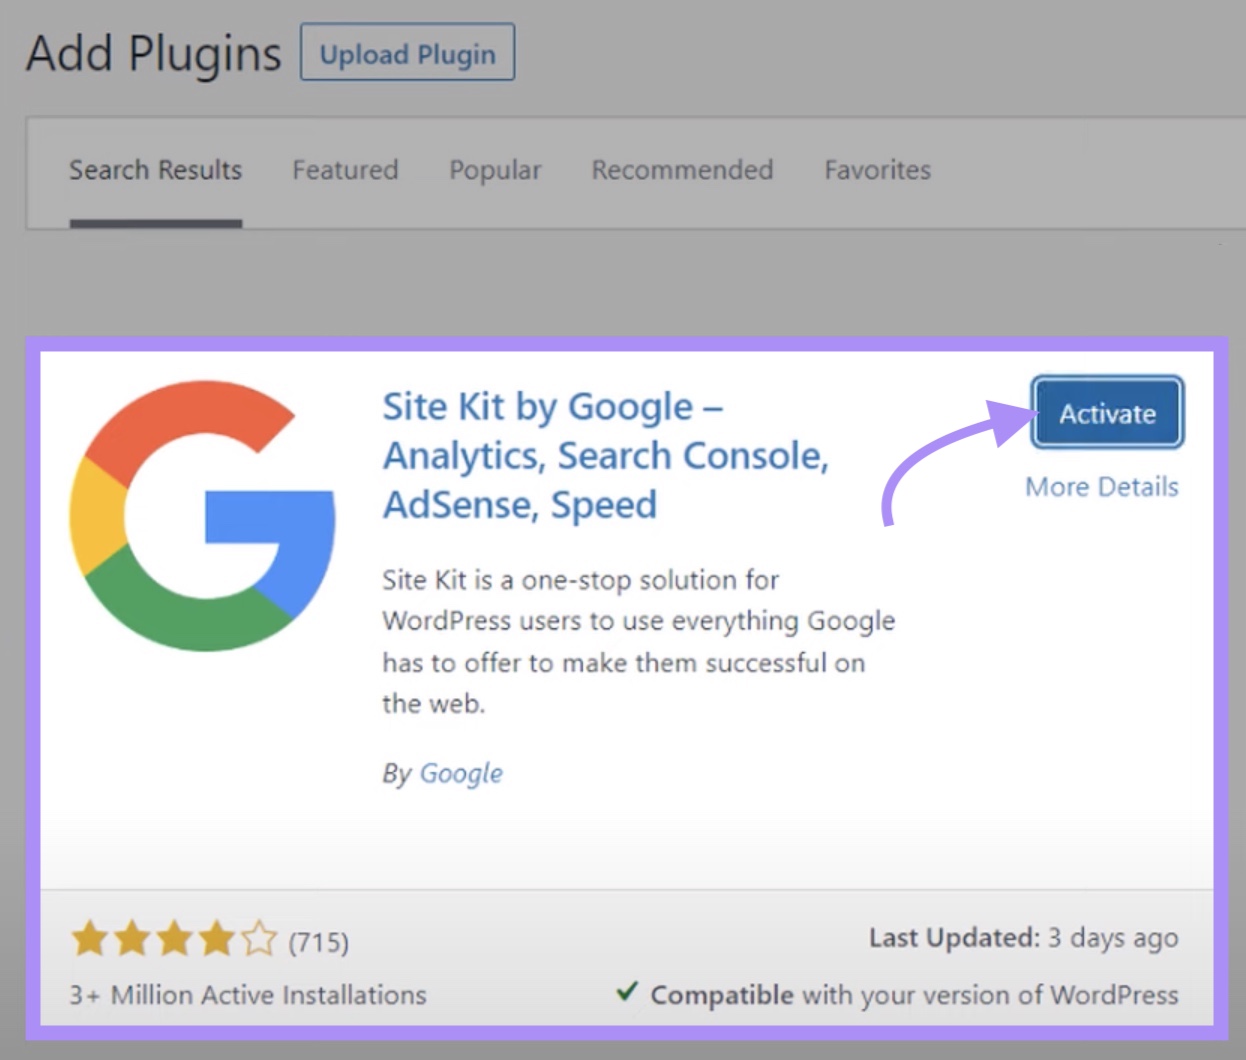 "Activate" button selected next to Site Kit by Google plugin